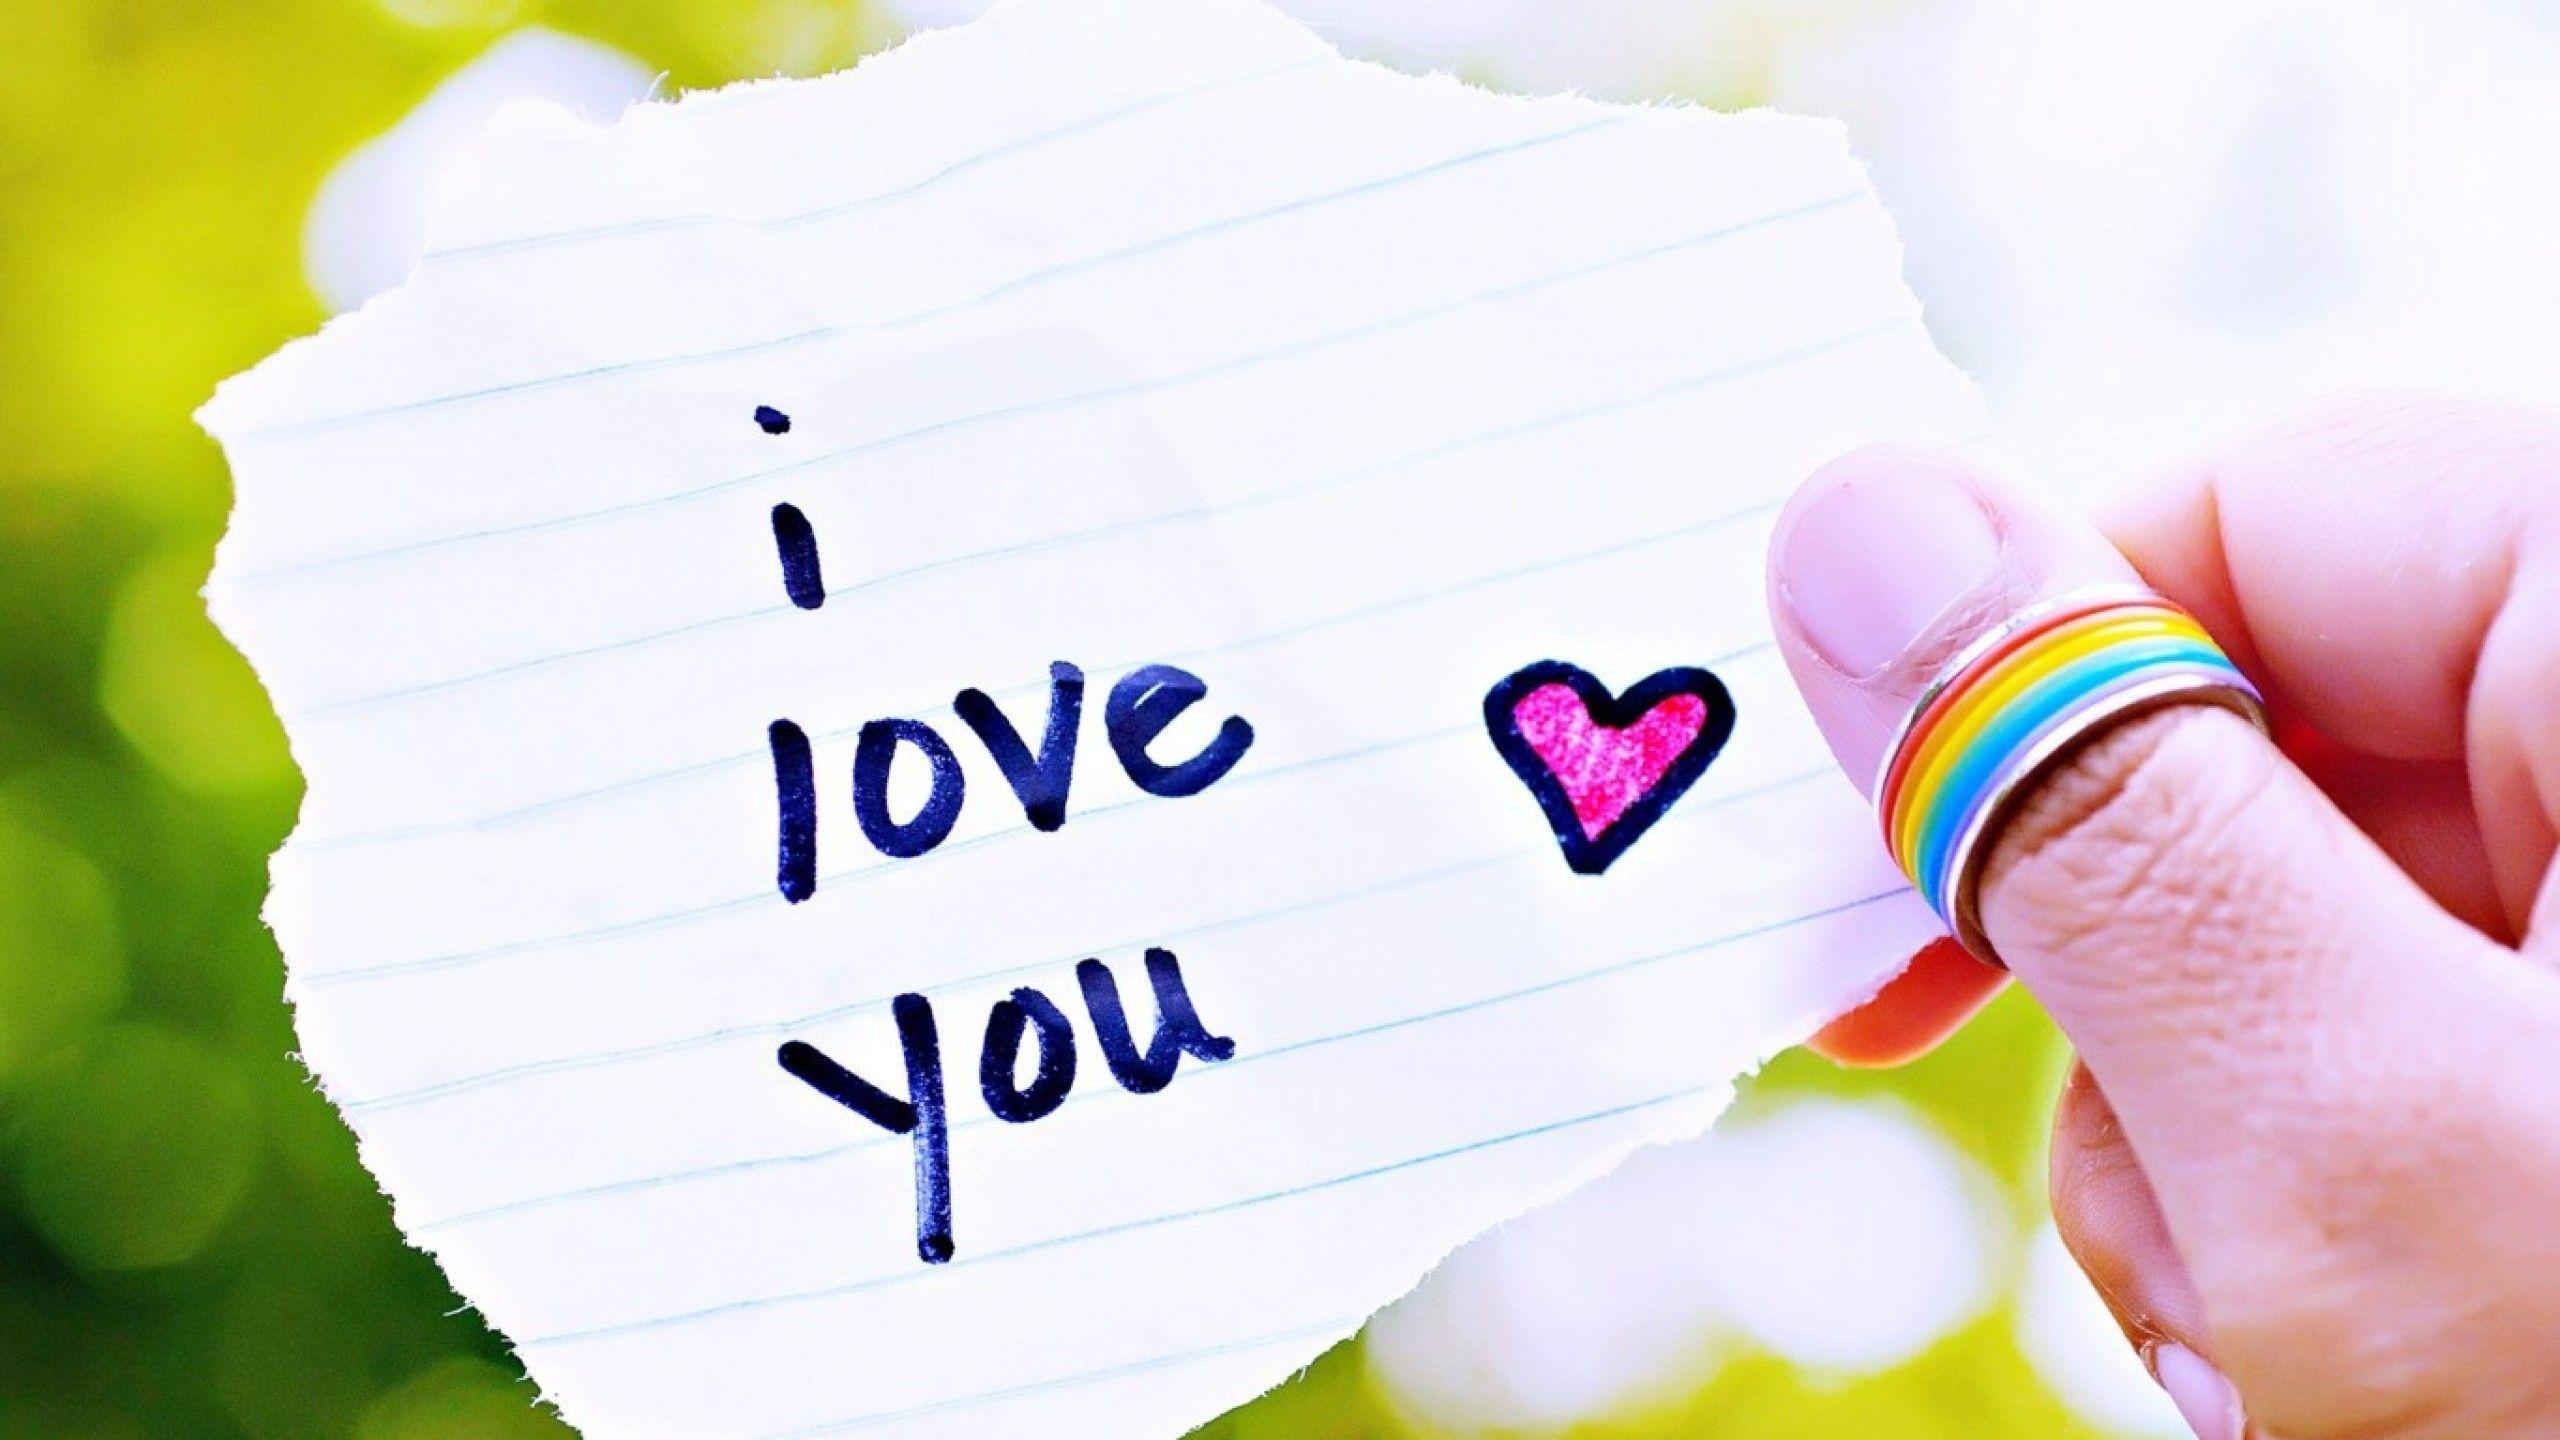 I Love You Image HD Collection